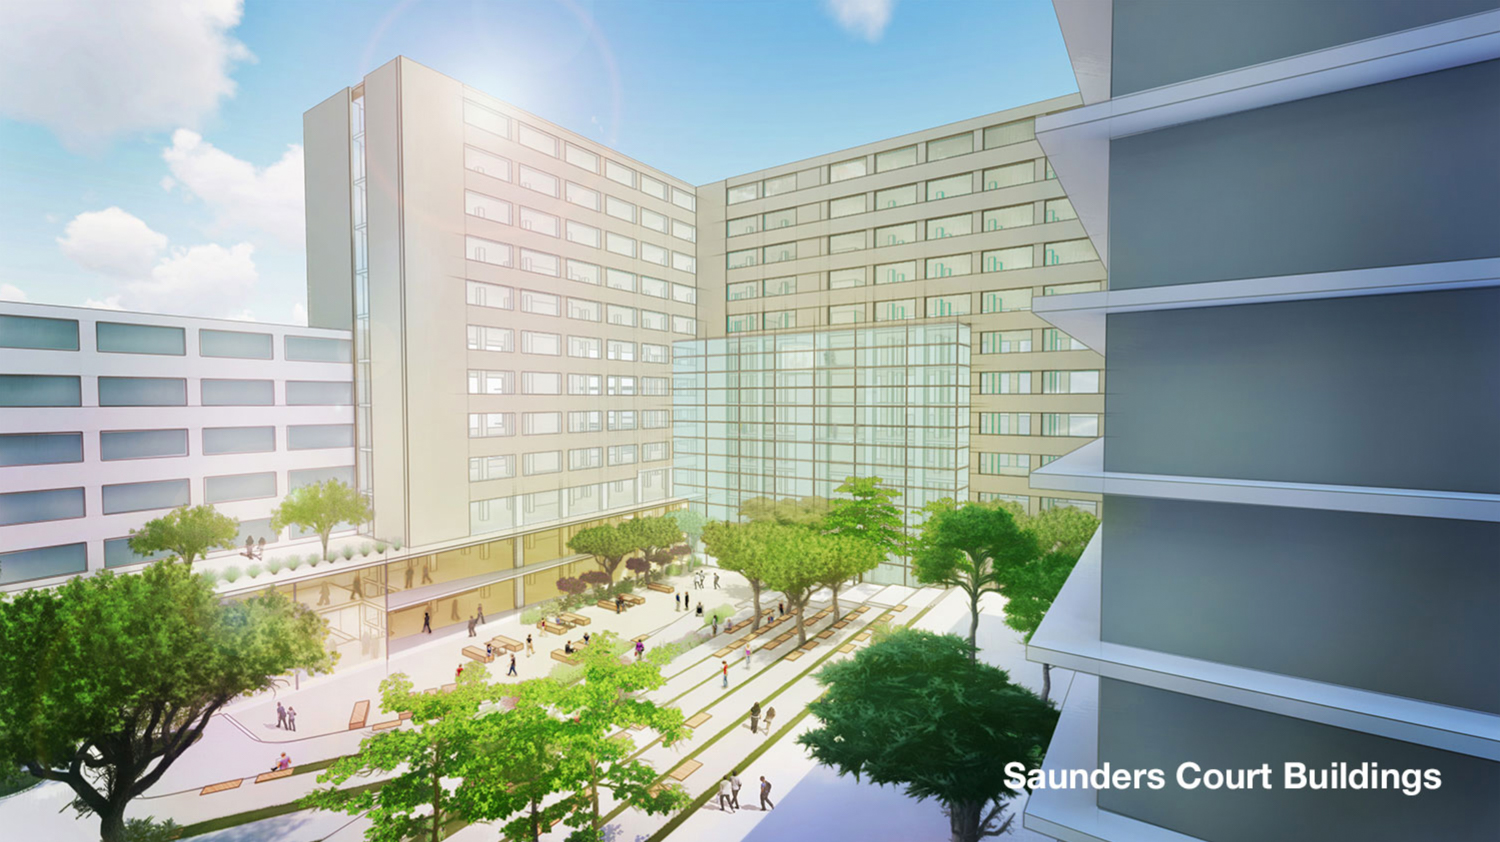 UCSF Parnassus Heights campus new hospital overlooking Saunders Court, design concept from previous iteration, rendering by UCSF via Perkins Eastman